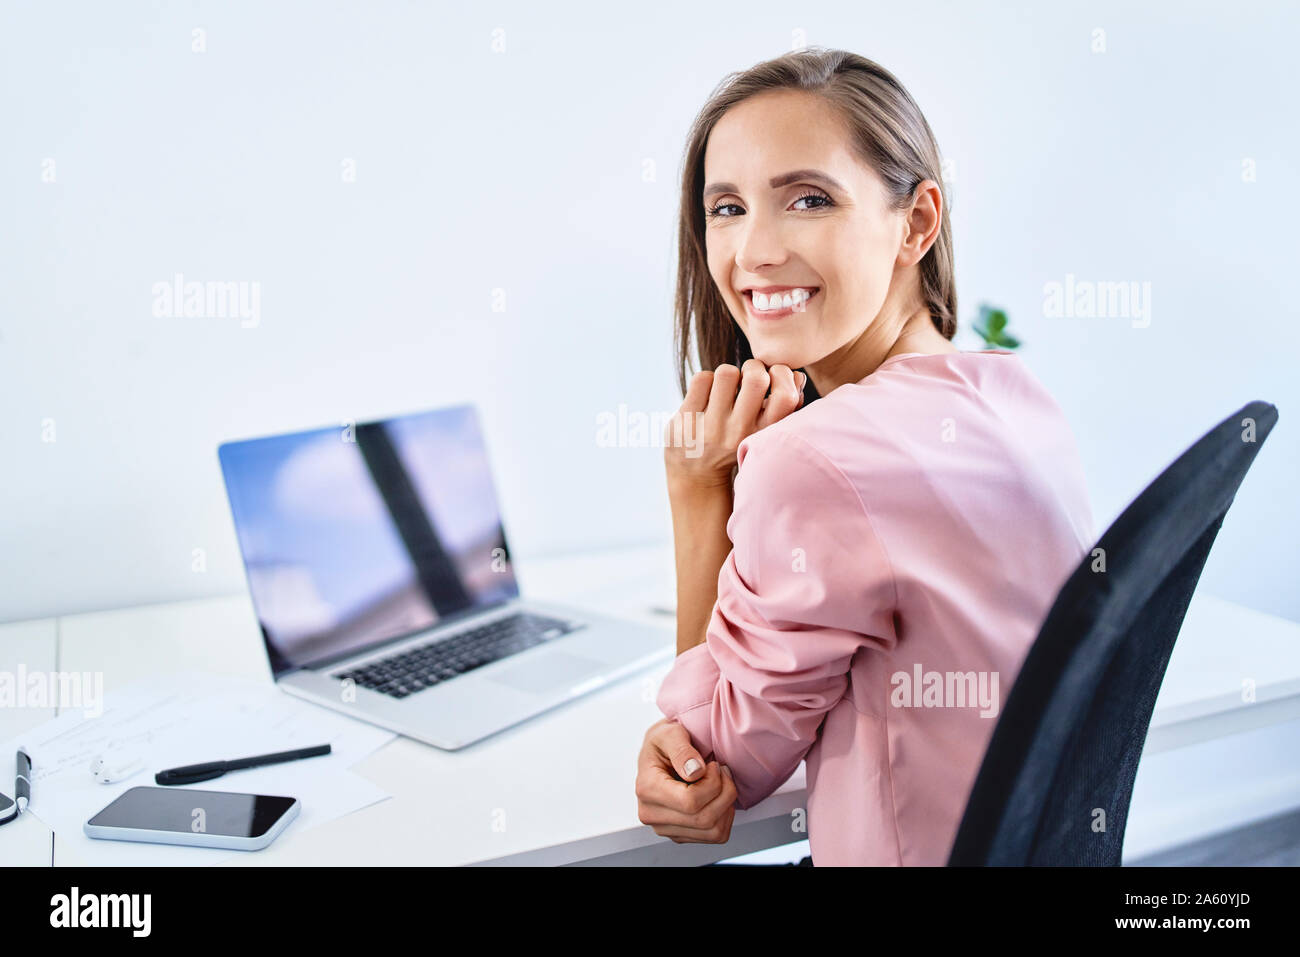 Cheerful young businesswoman smiling at camera while working in office Banque D'Images